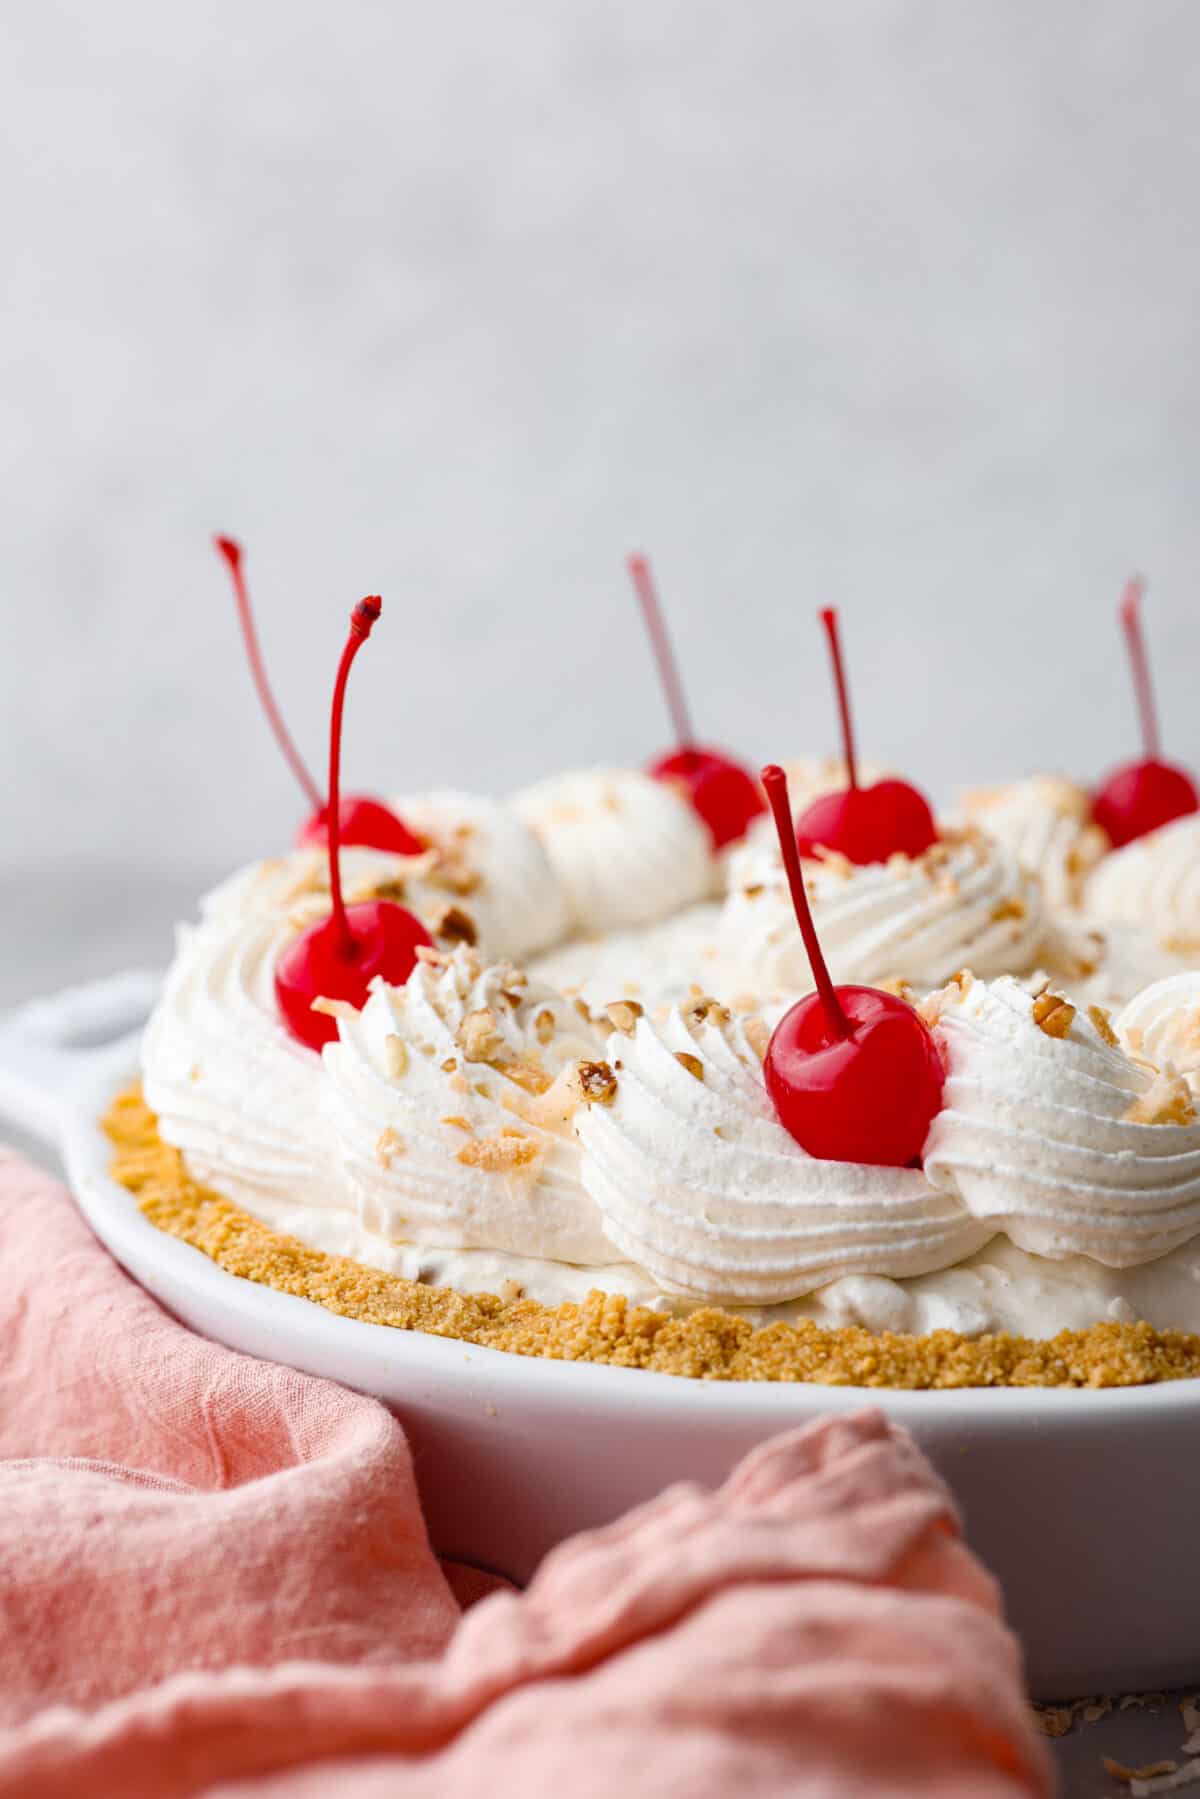 A whole million dollar pie, topped with whipped cream and maraschino cherries.